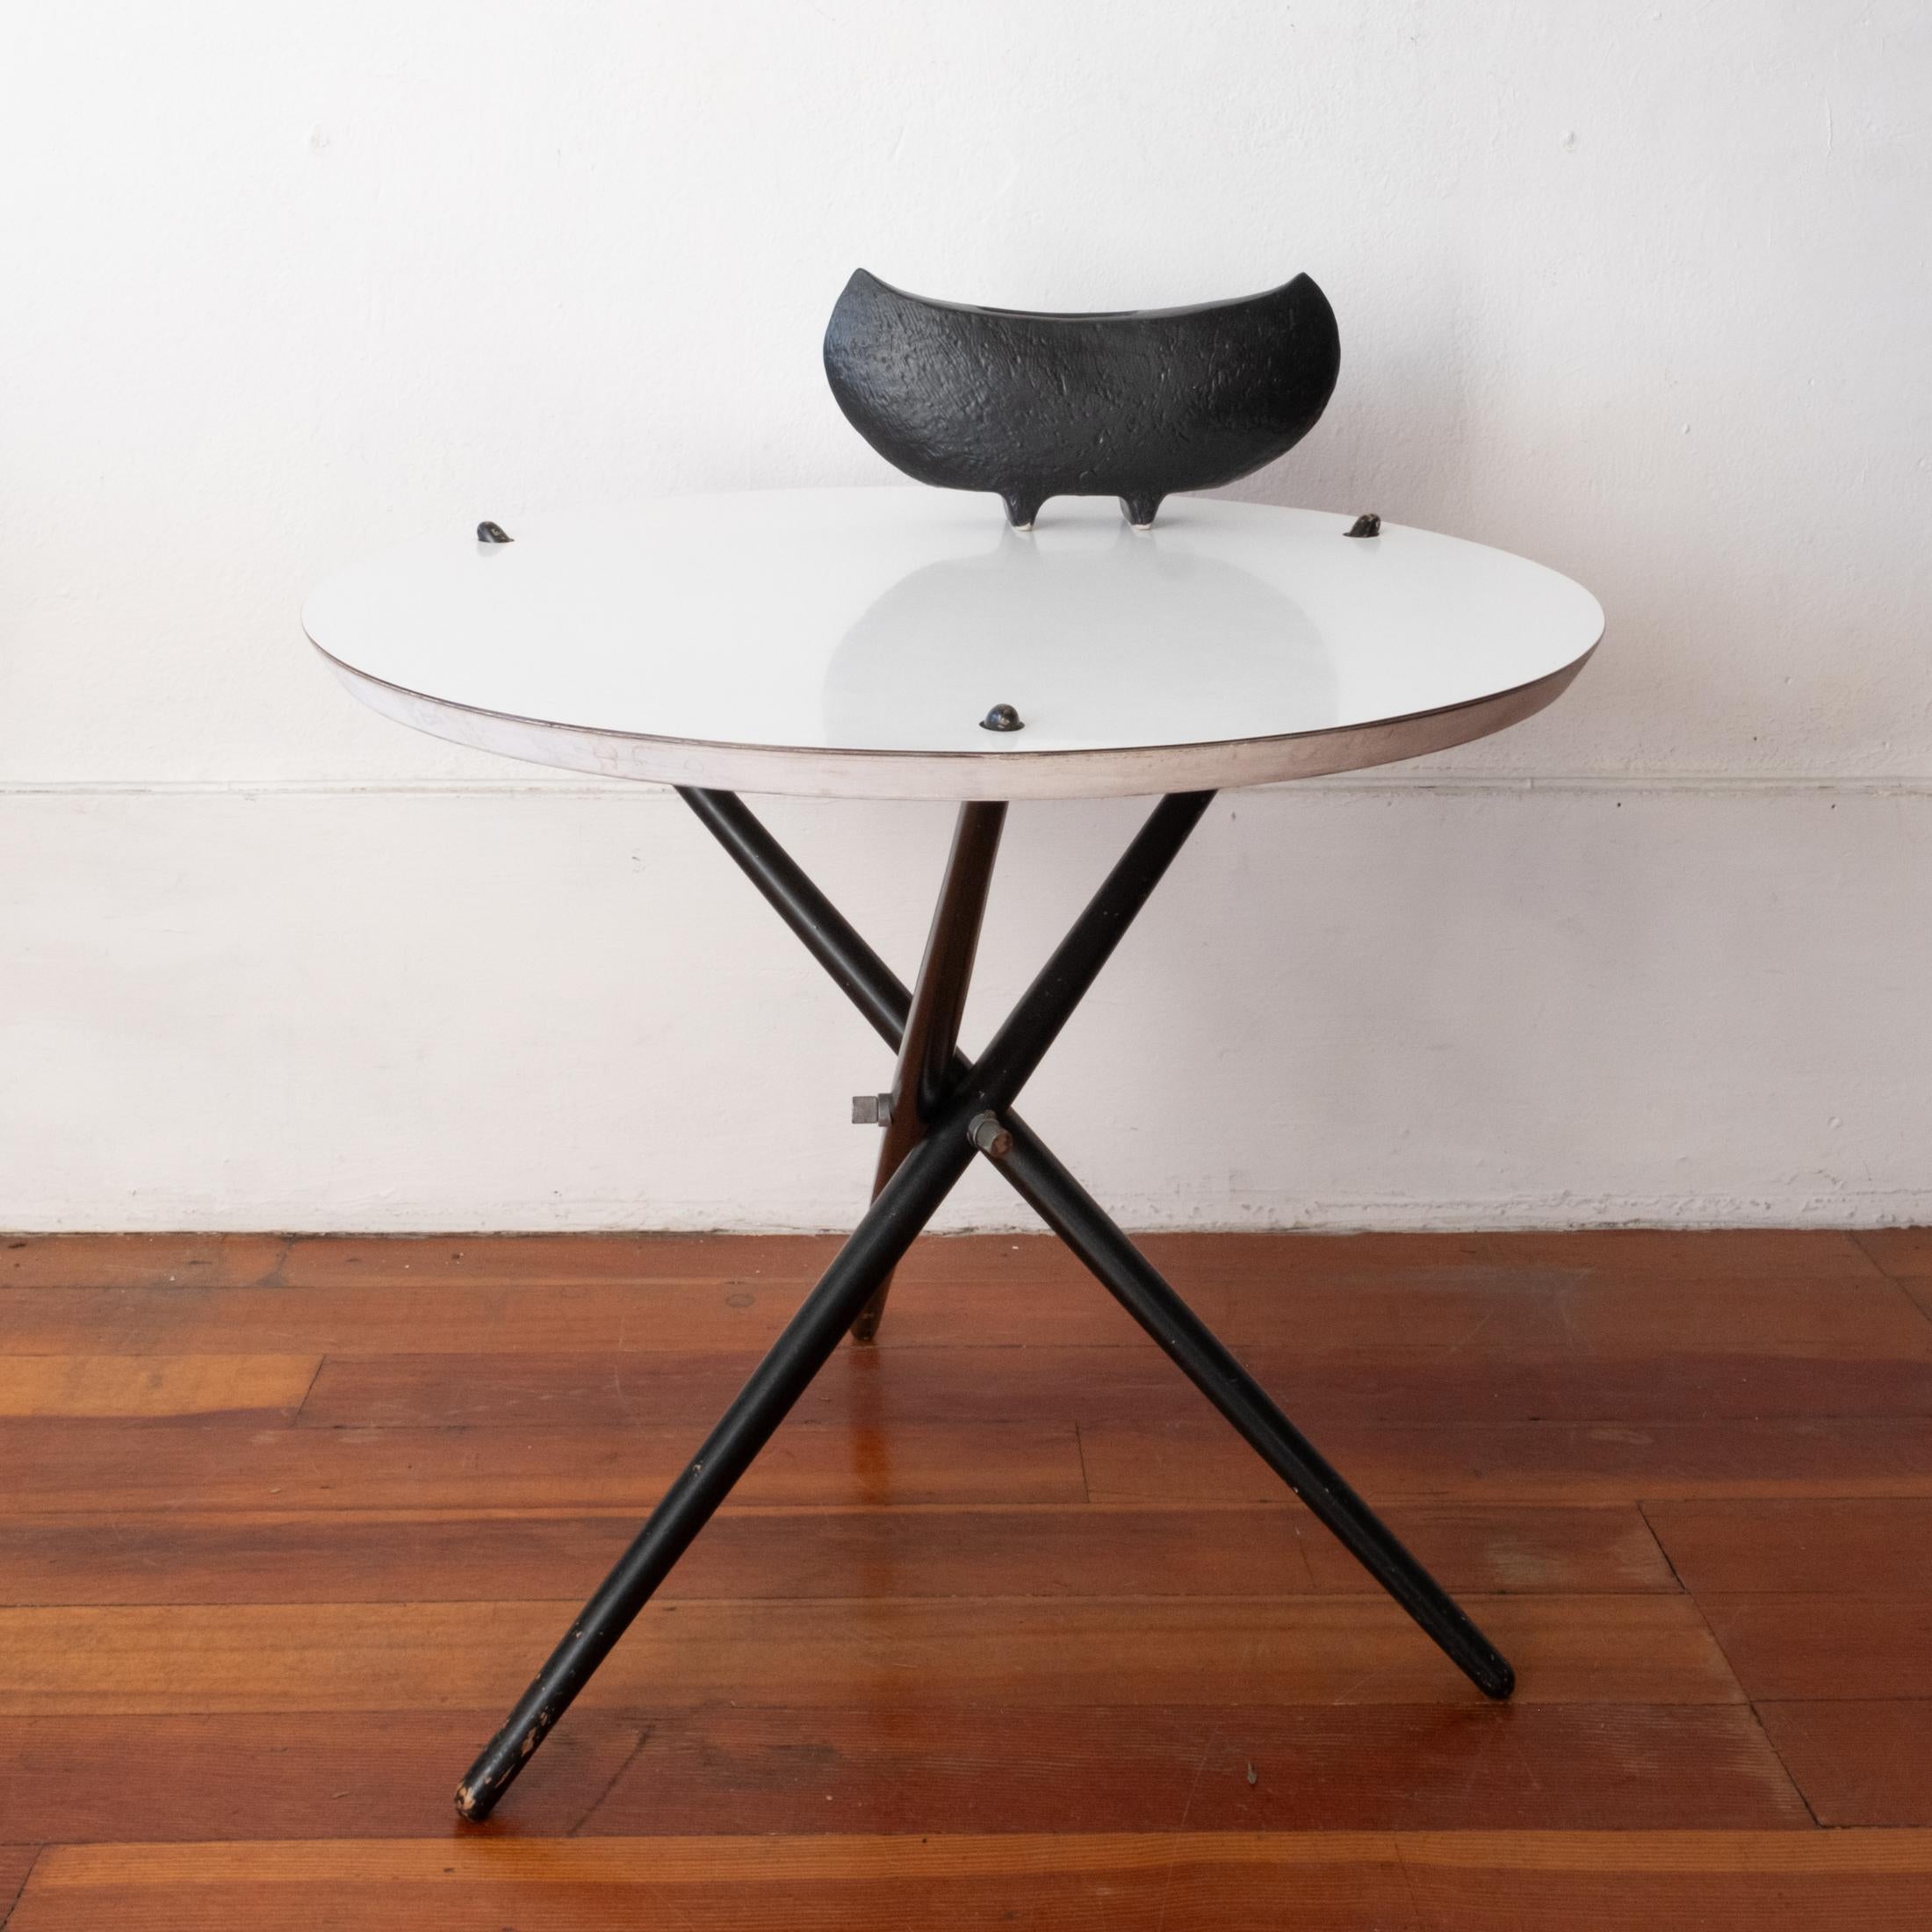 Hans Bellman tripod side table, Knoll No. 103 (1951). White laminate top, black painted wood base and solid metal hardware. The table can be easily disassembled for storage. Original paint, hardware and finish. 